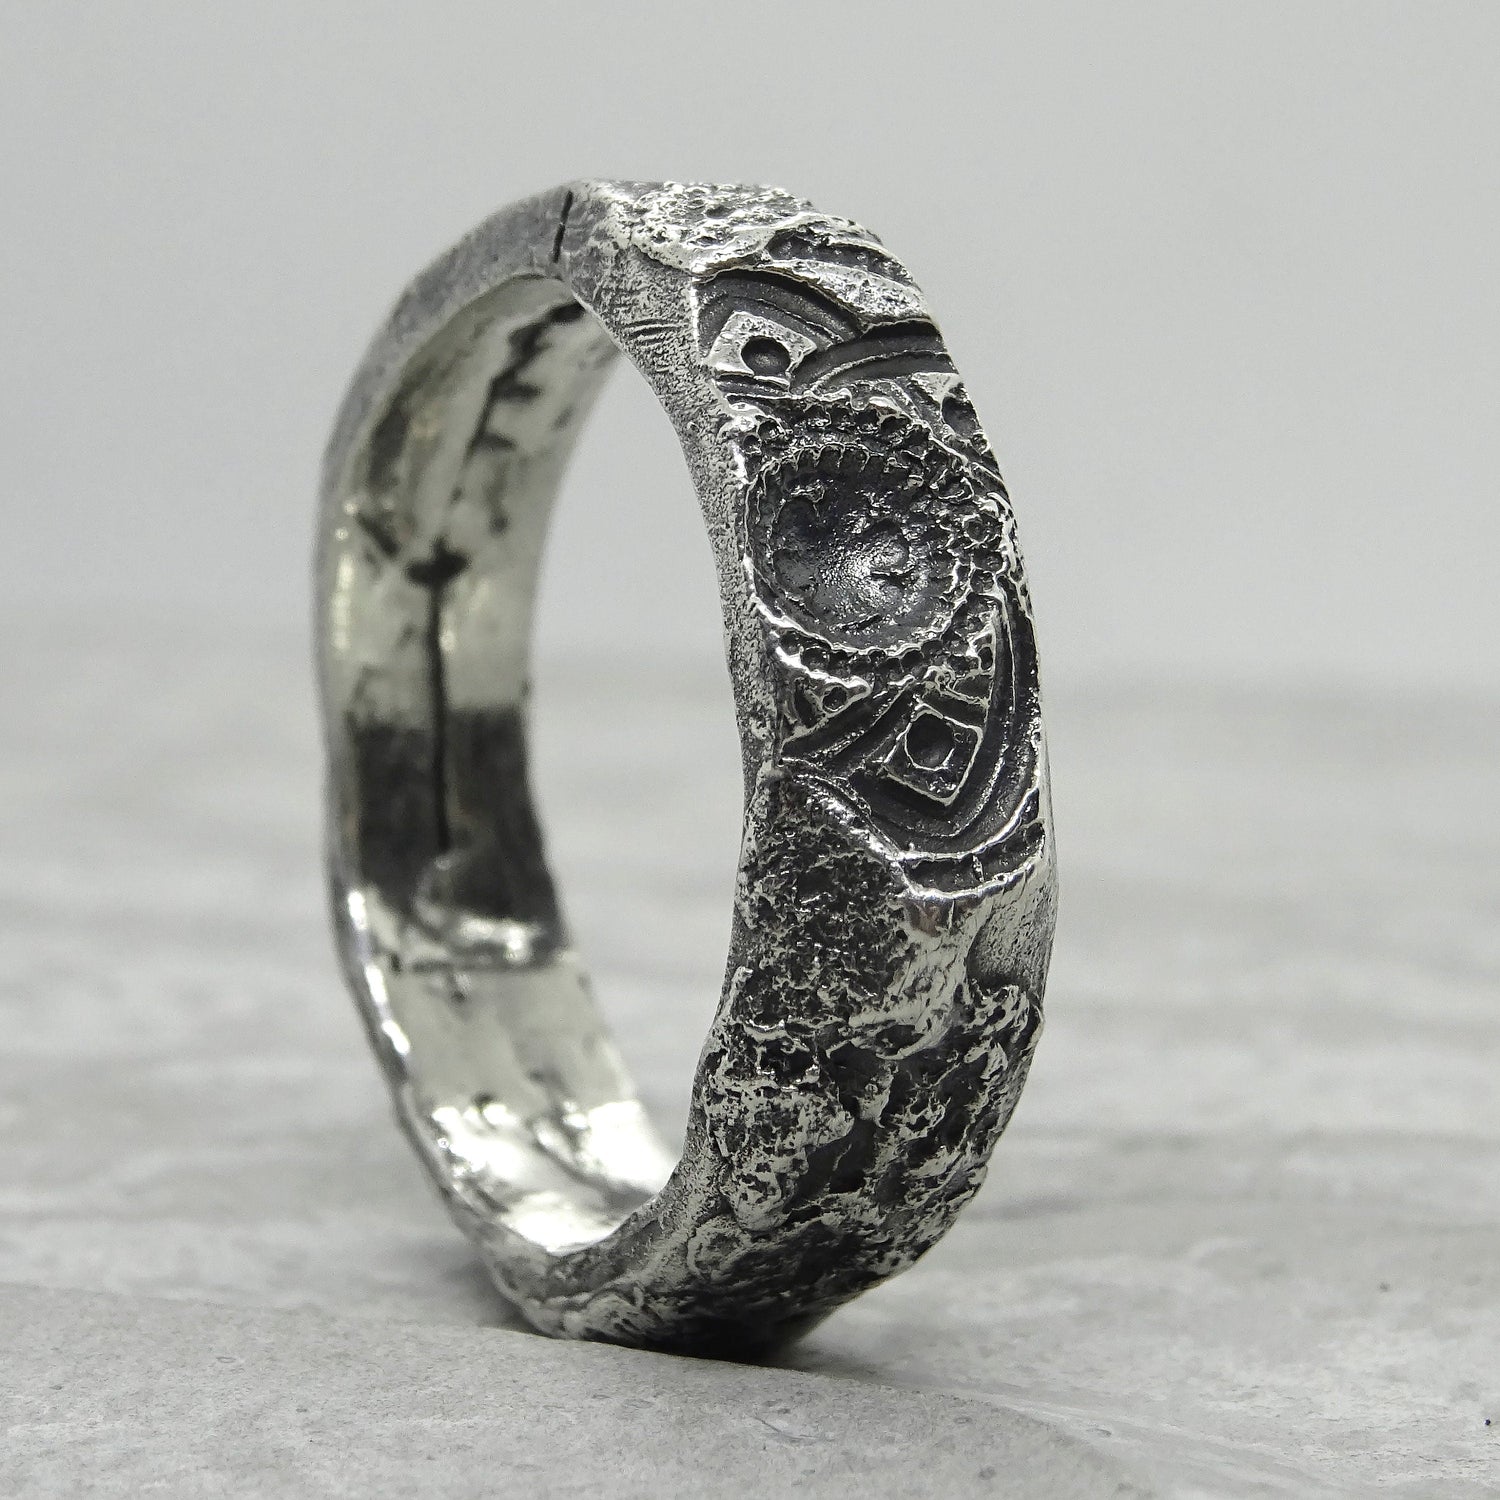 Mandala ring- textured ring with a rich structure and ethnic pattern Rings with patterns Project50g 